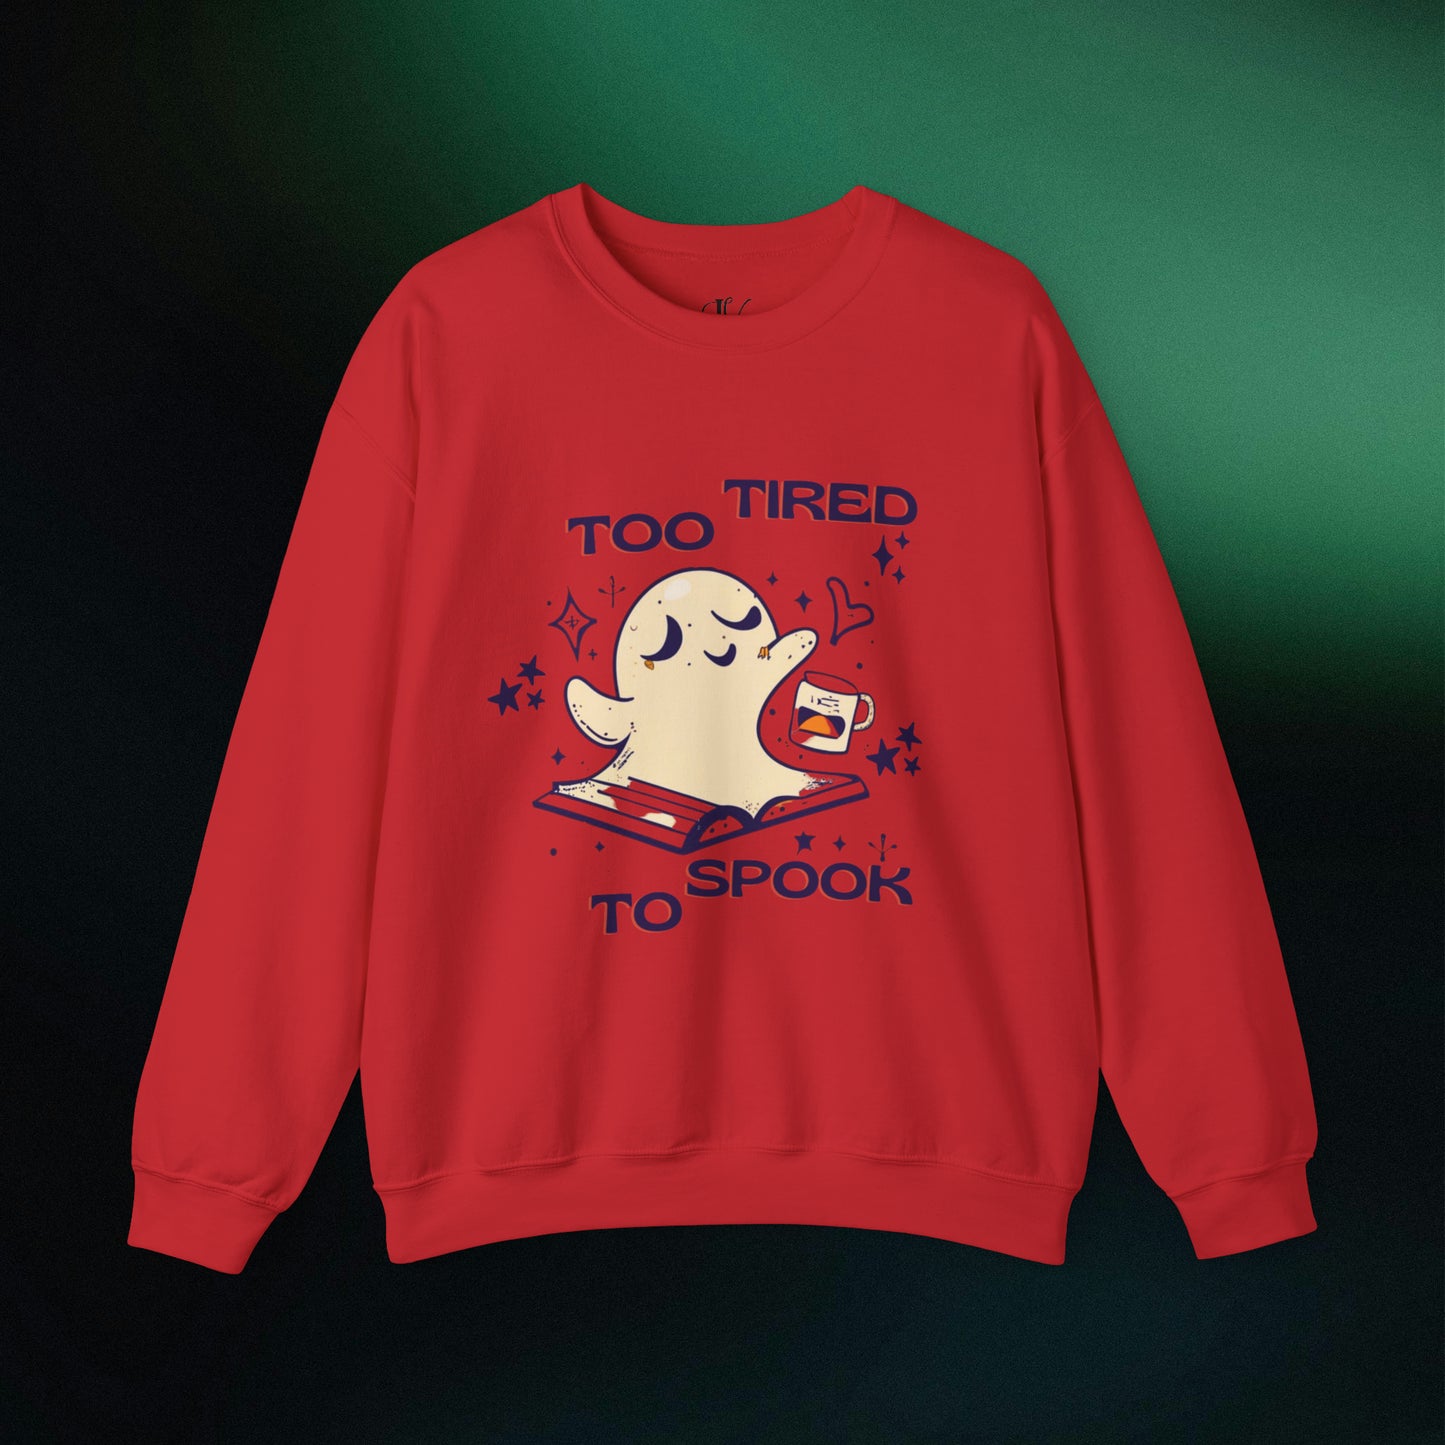 Spooky Literary Spirits: Ghost Reading Books Sweater - Bookish Halloween Sweatshirt for a Hauntingly Stylish Look, Perfect Halloween Teacher Gift and Librarian Halloween Sweatshirt S Red 